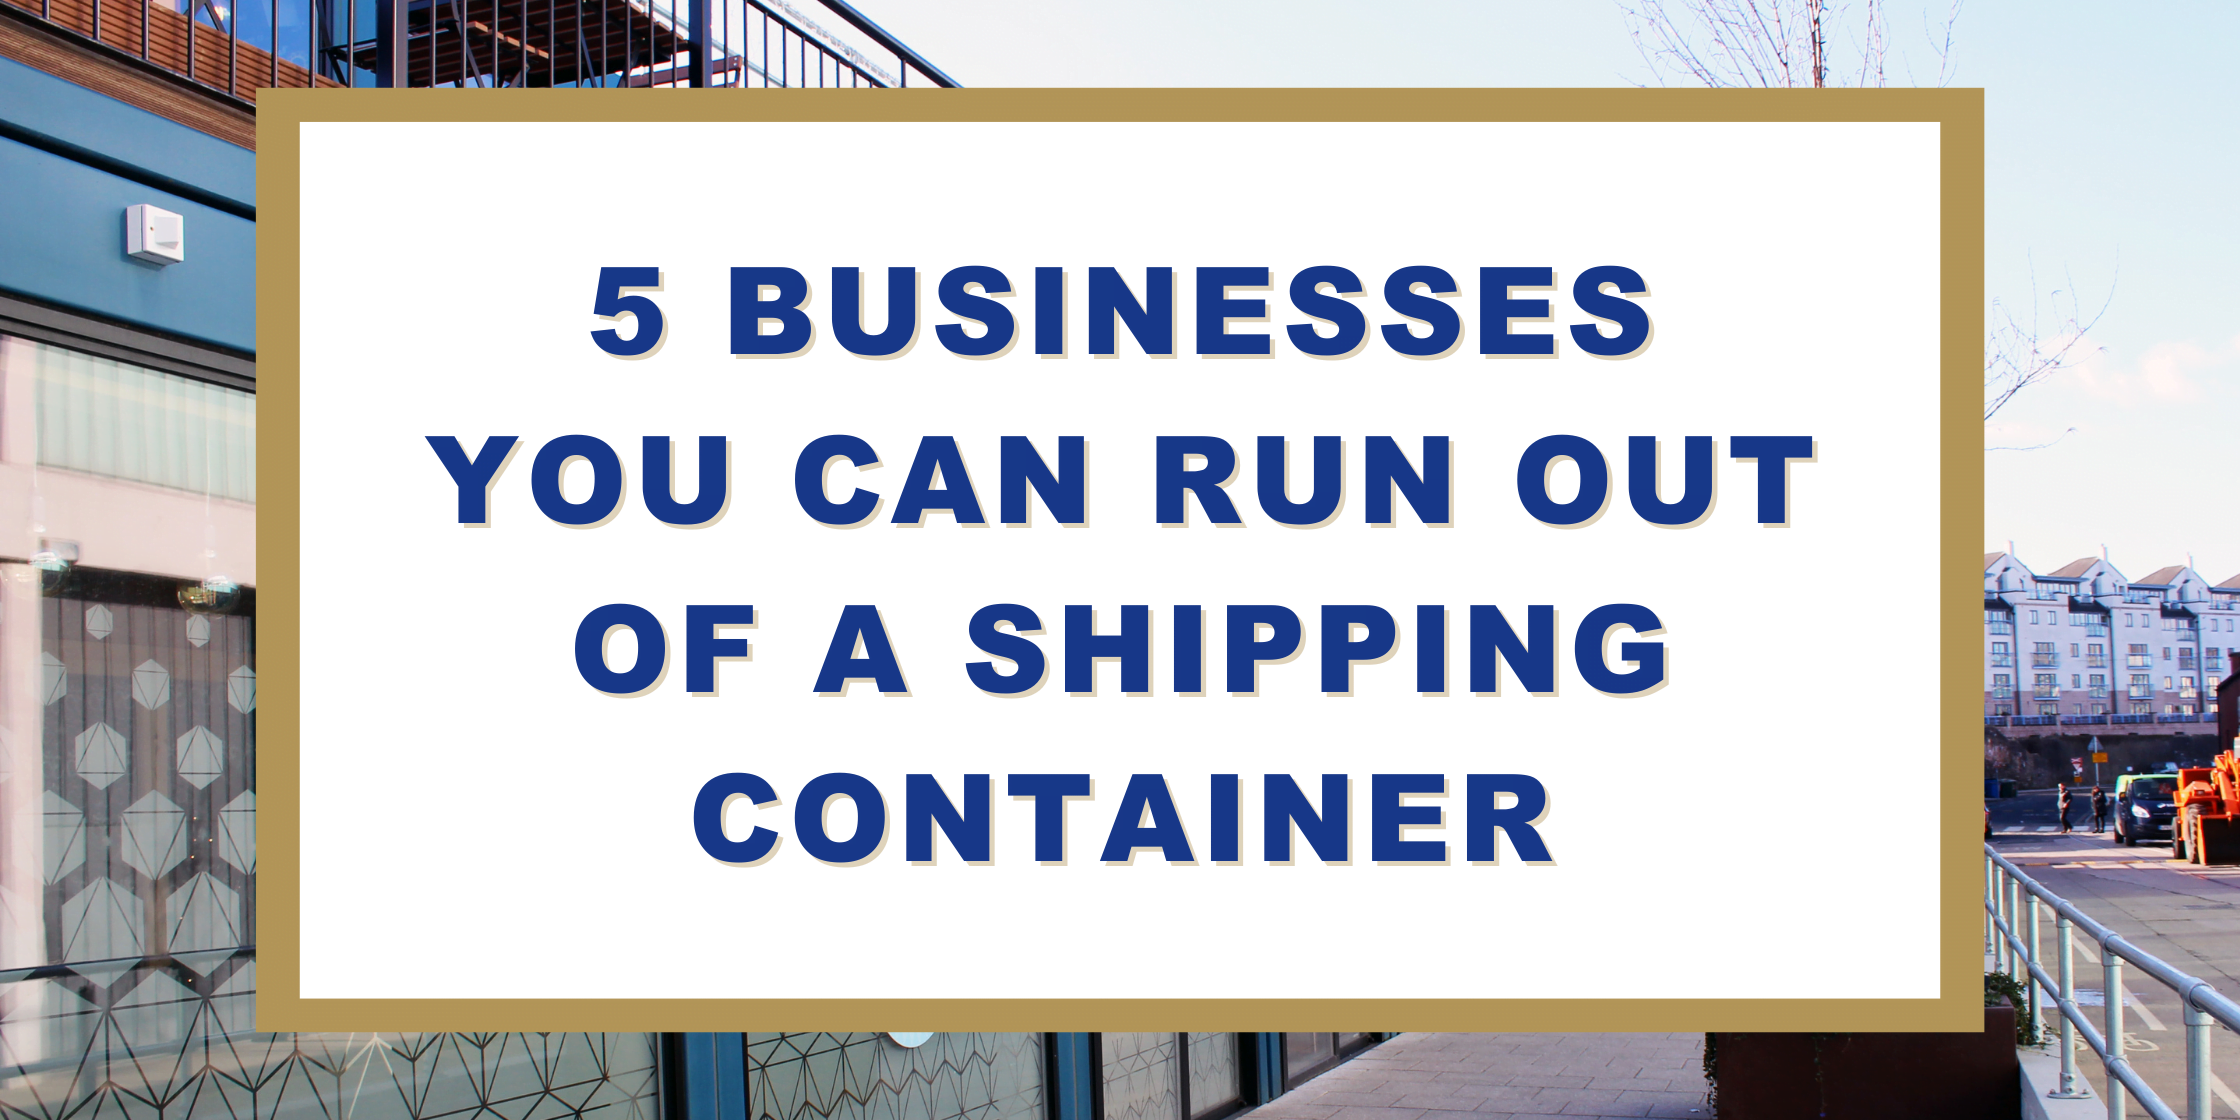 5 Businesses You Can Run Out Of A Shipping Container